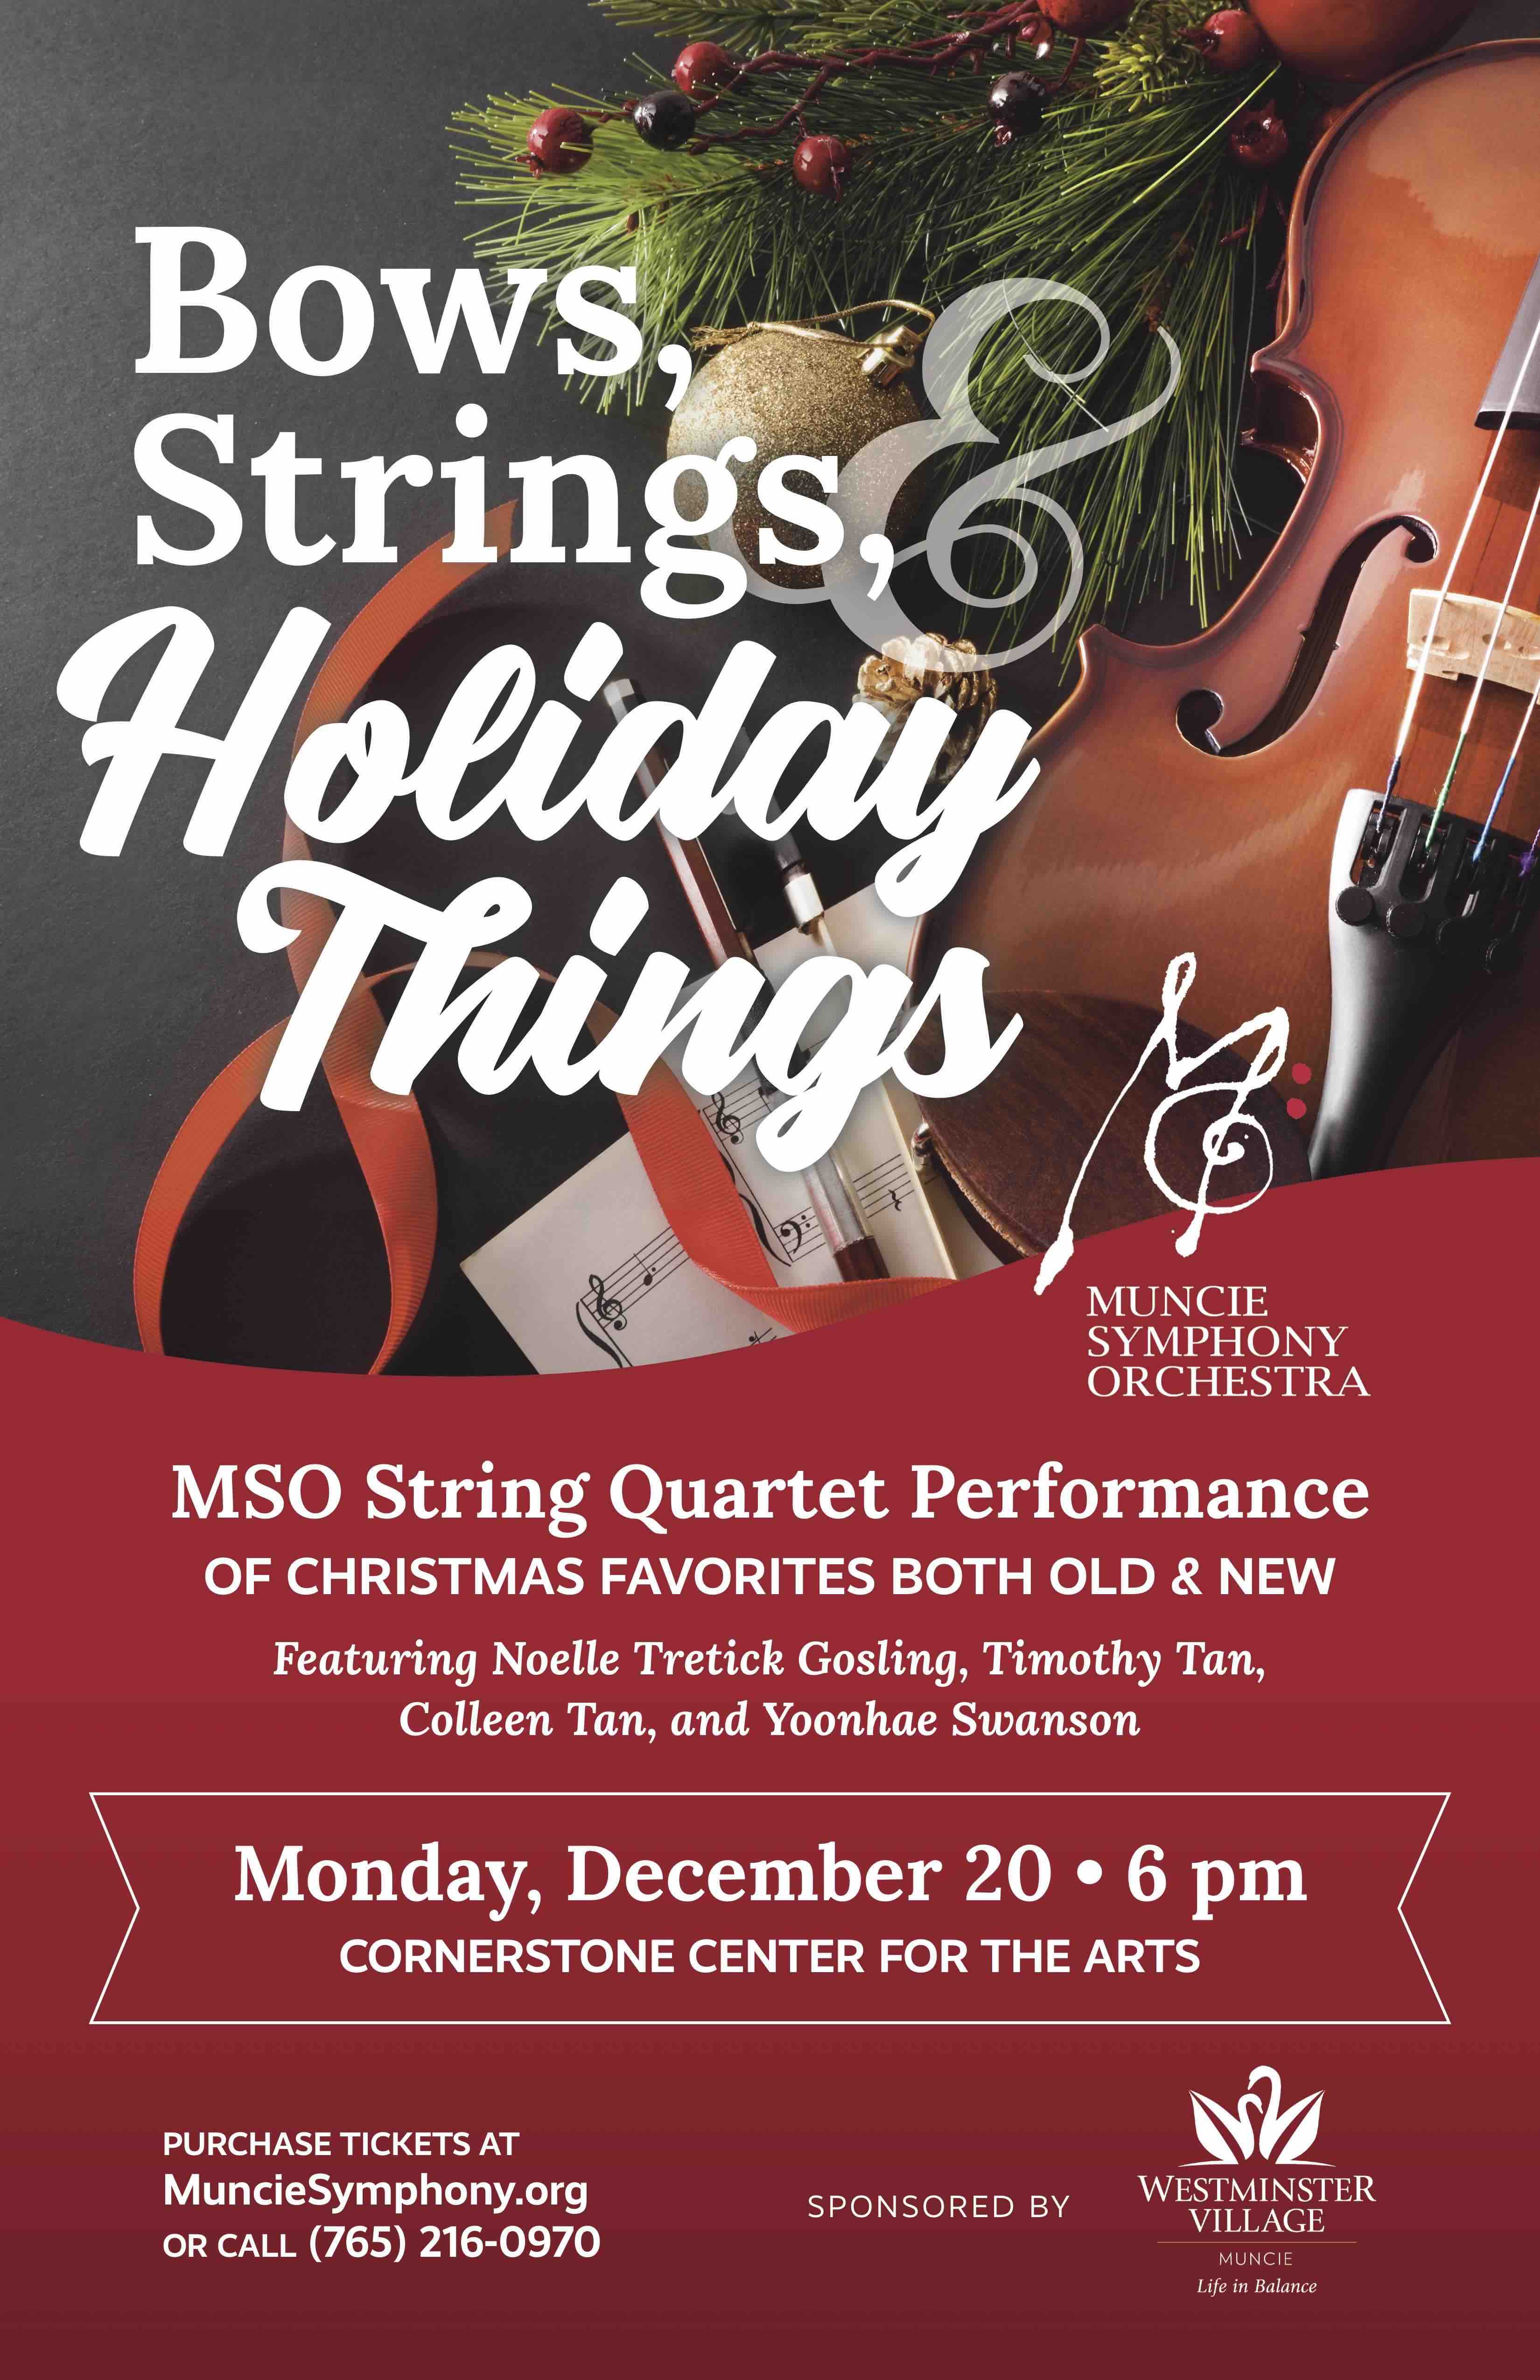 Image for Bows, Strings, & Holiday Things